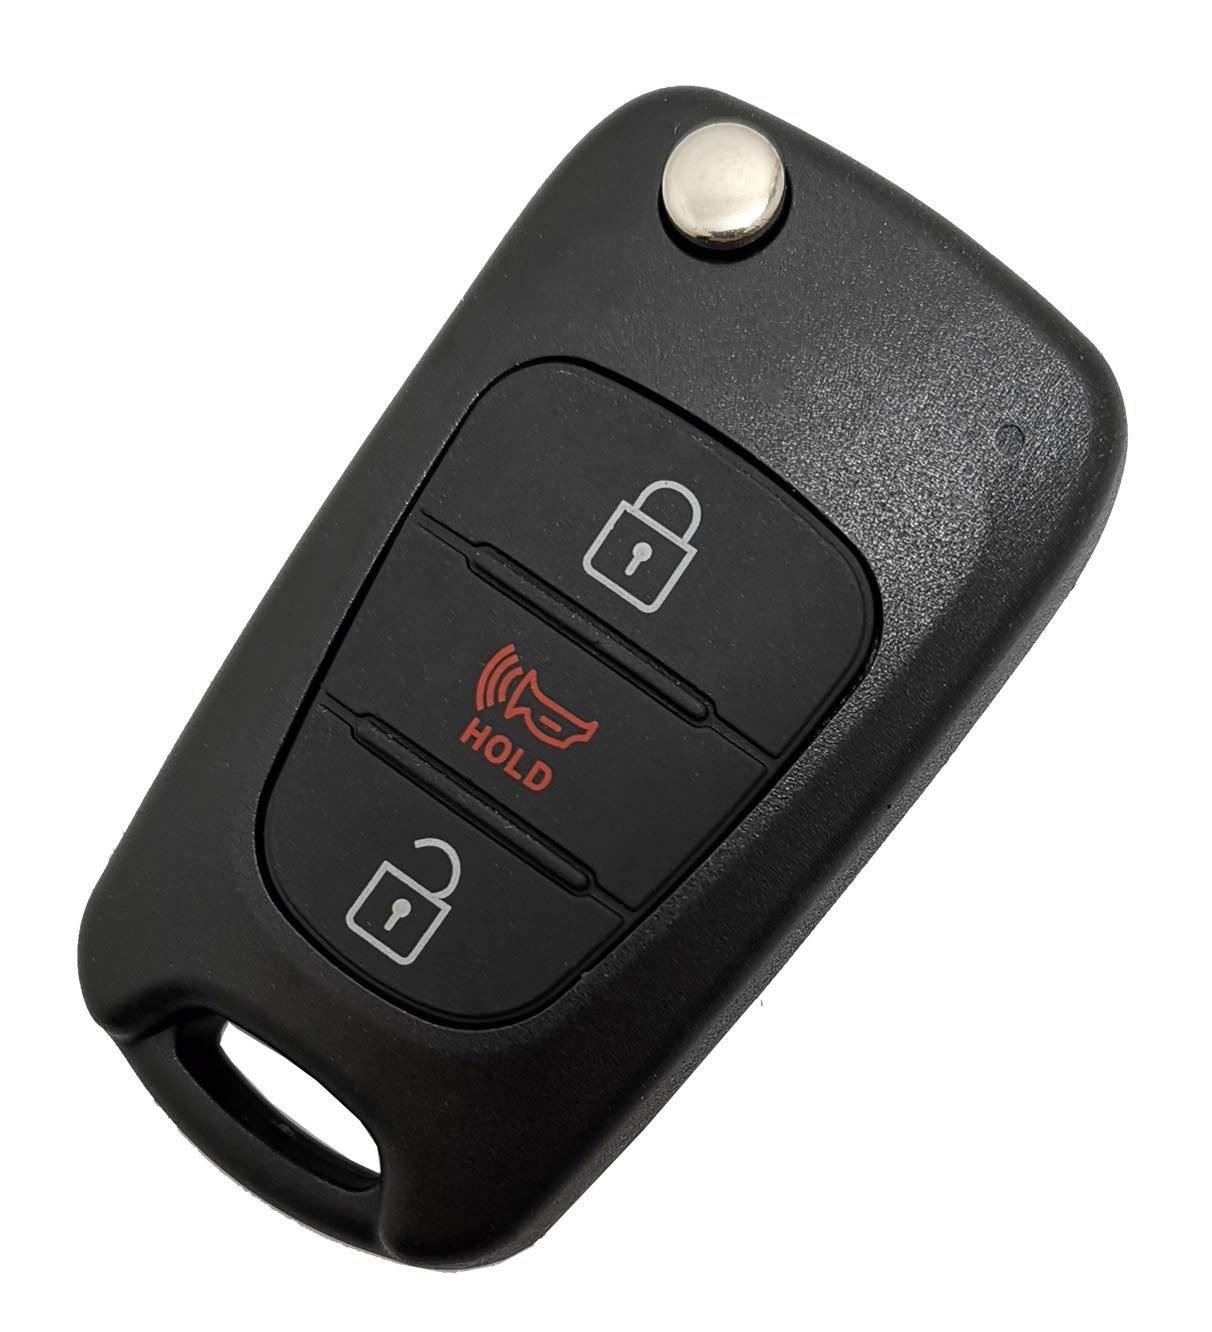 Replacement Key Fob Case Fits Kia Soul Rio Sportage 3 Buttons Key Fob Shell Flip Keyless Entry Remote Fob Cover Casing with Uncut Blade (1)